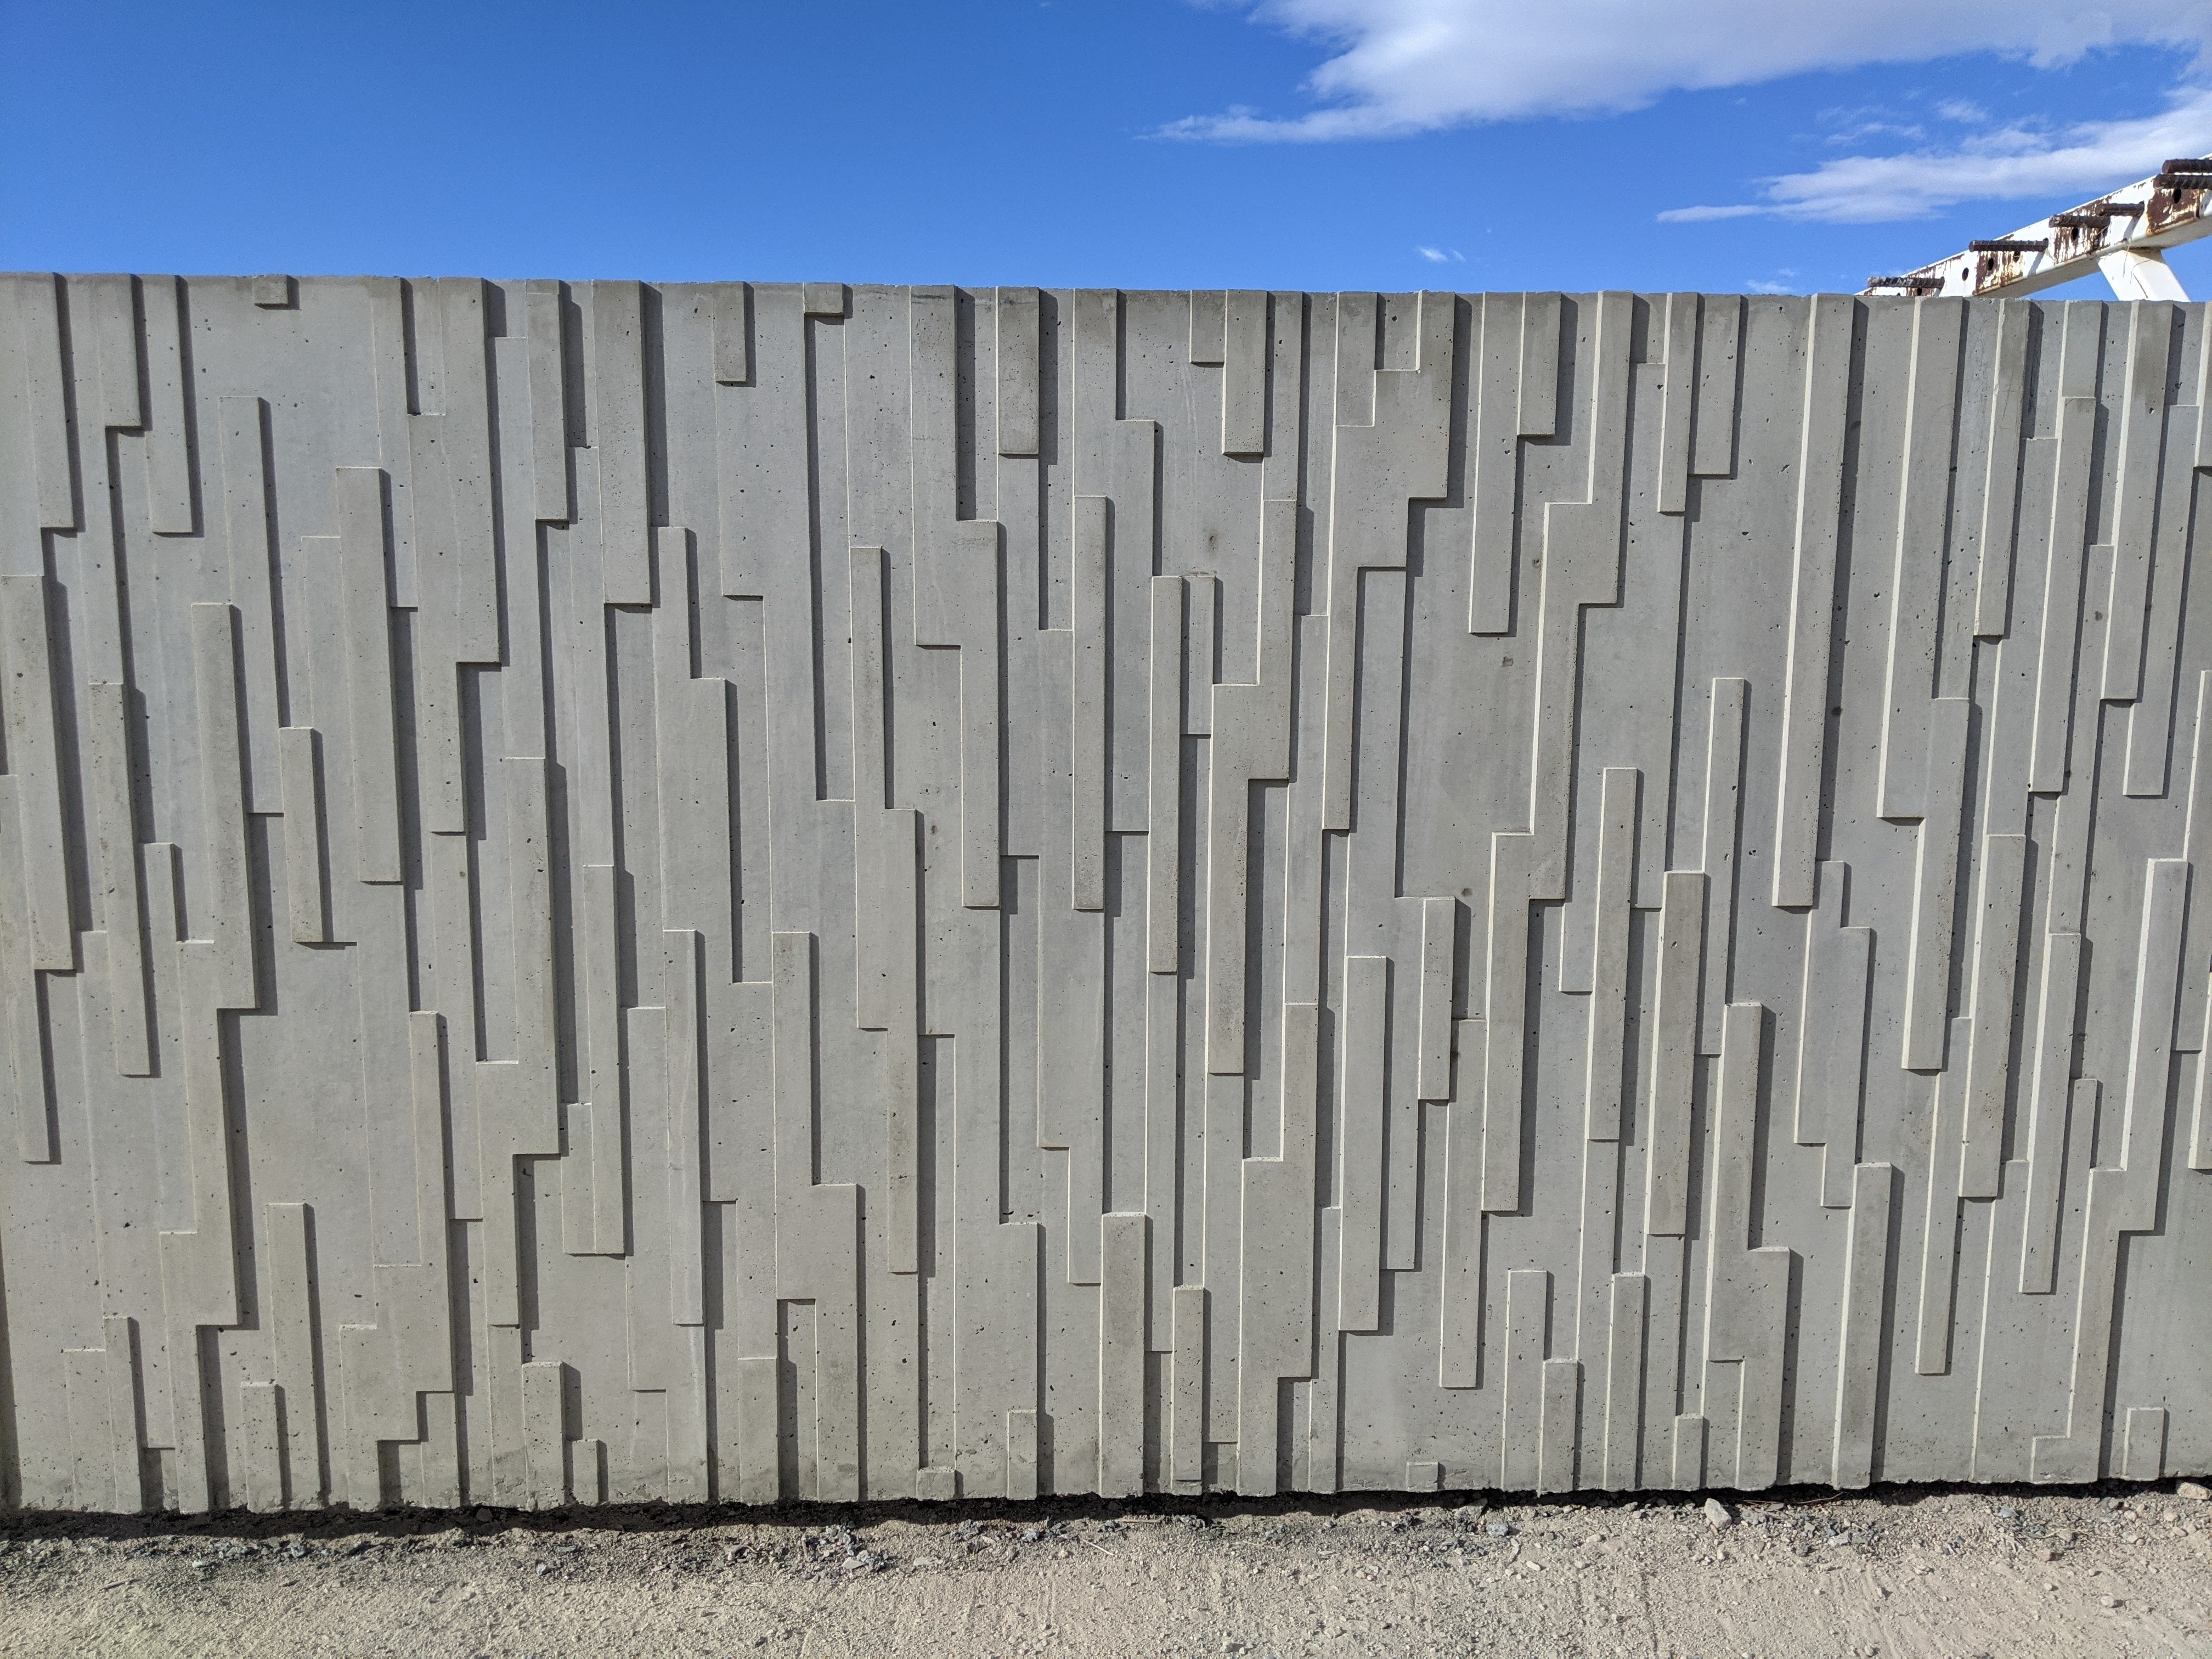 noise wall after.jpg detail image